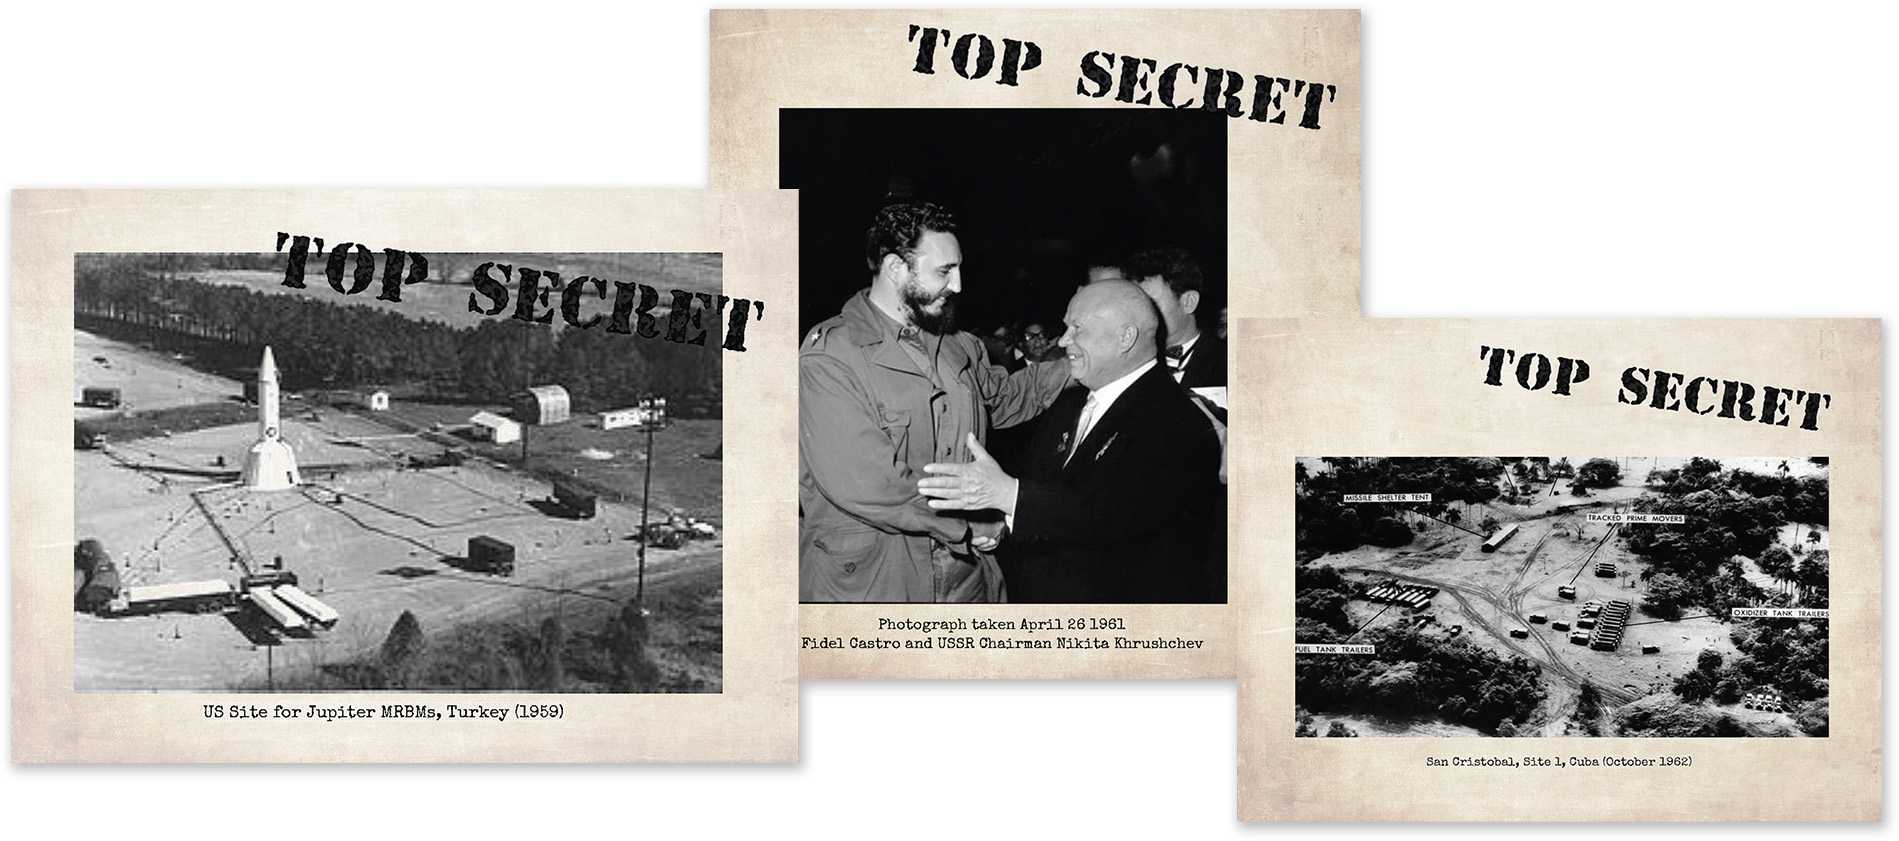 Examples of documents marked Top Secret showing events from the Cold War.